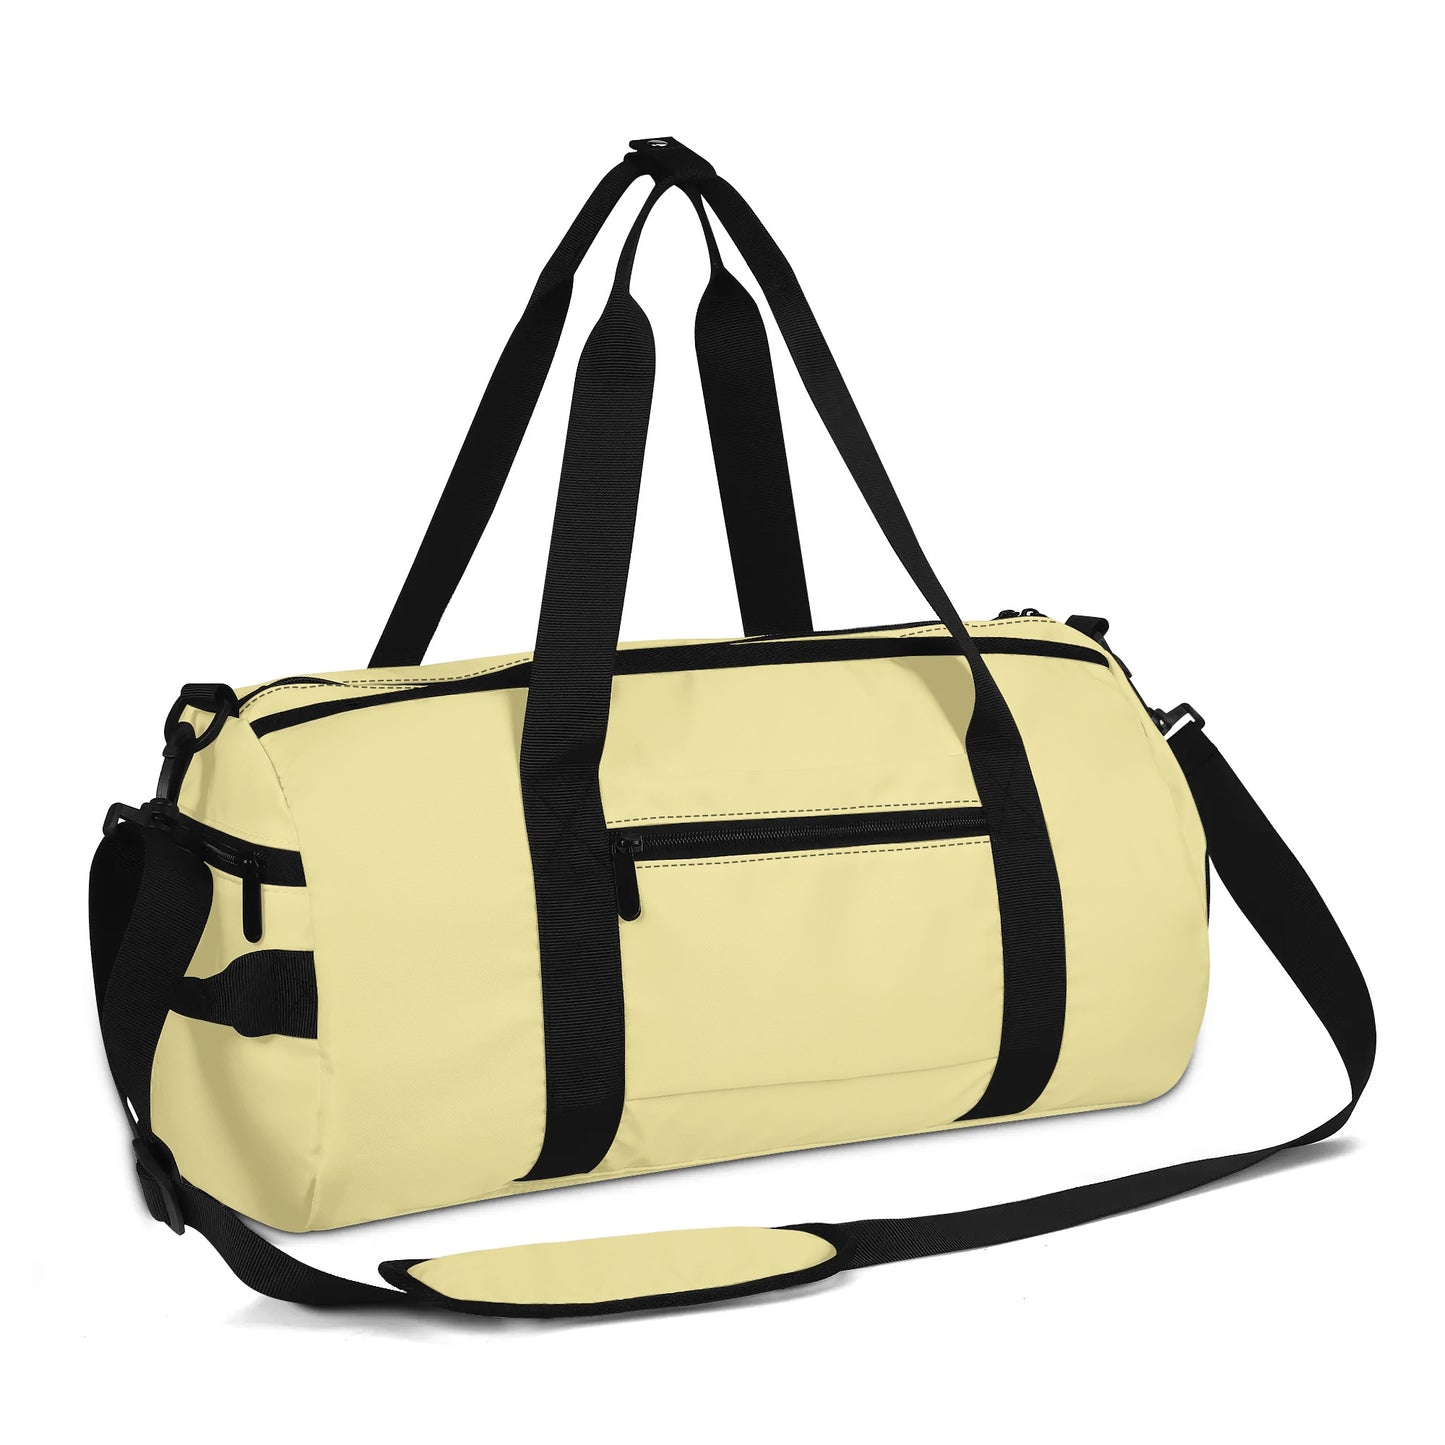 In Christ I Am Flawlessly & Purposefully Created Christian Gym Duffel Bag popcustoms